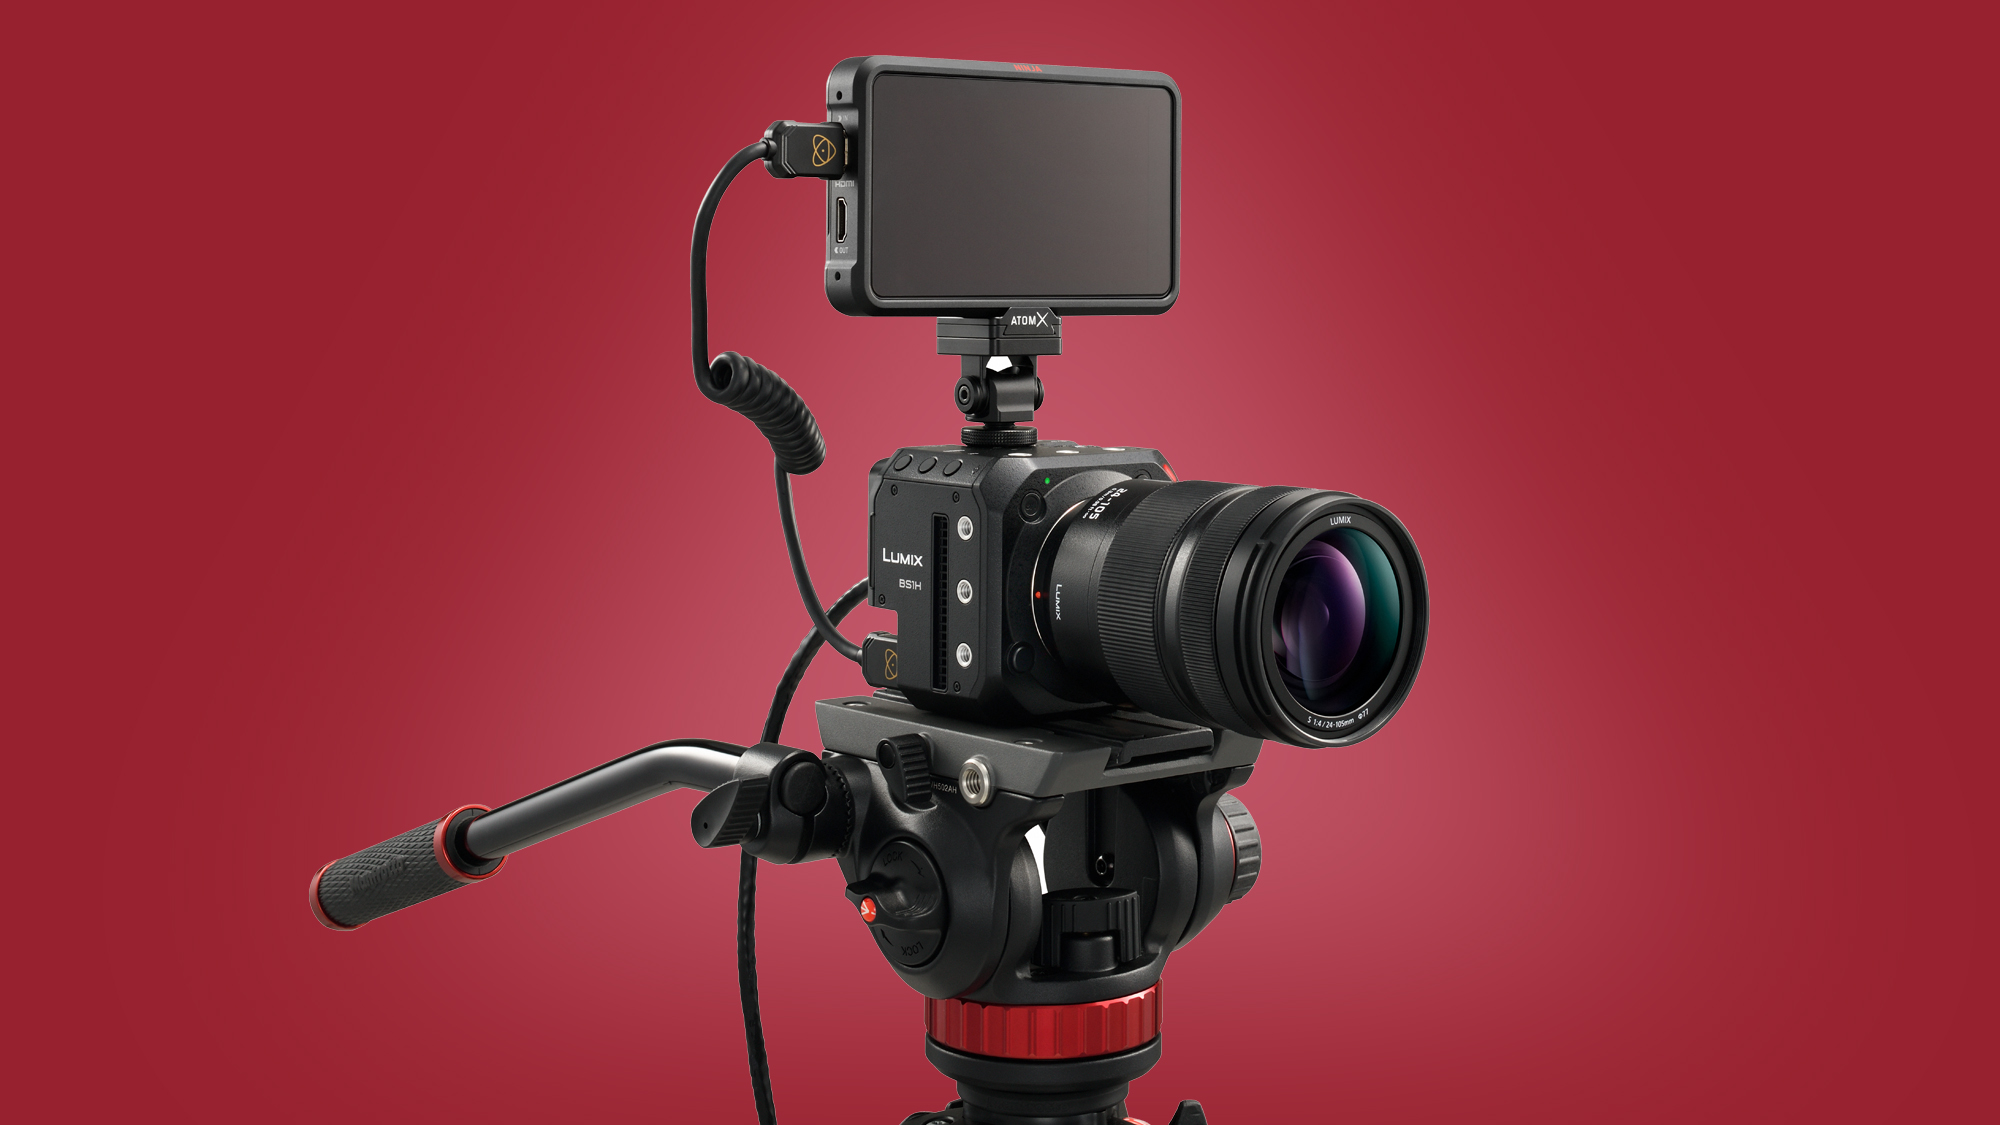 The Panasonic BS1H box camera on a red background